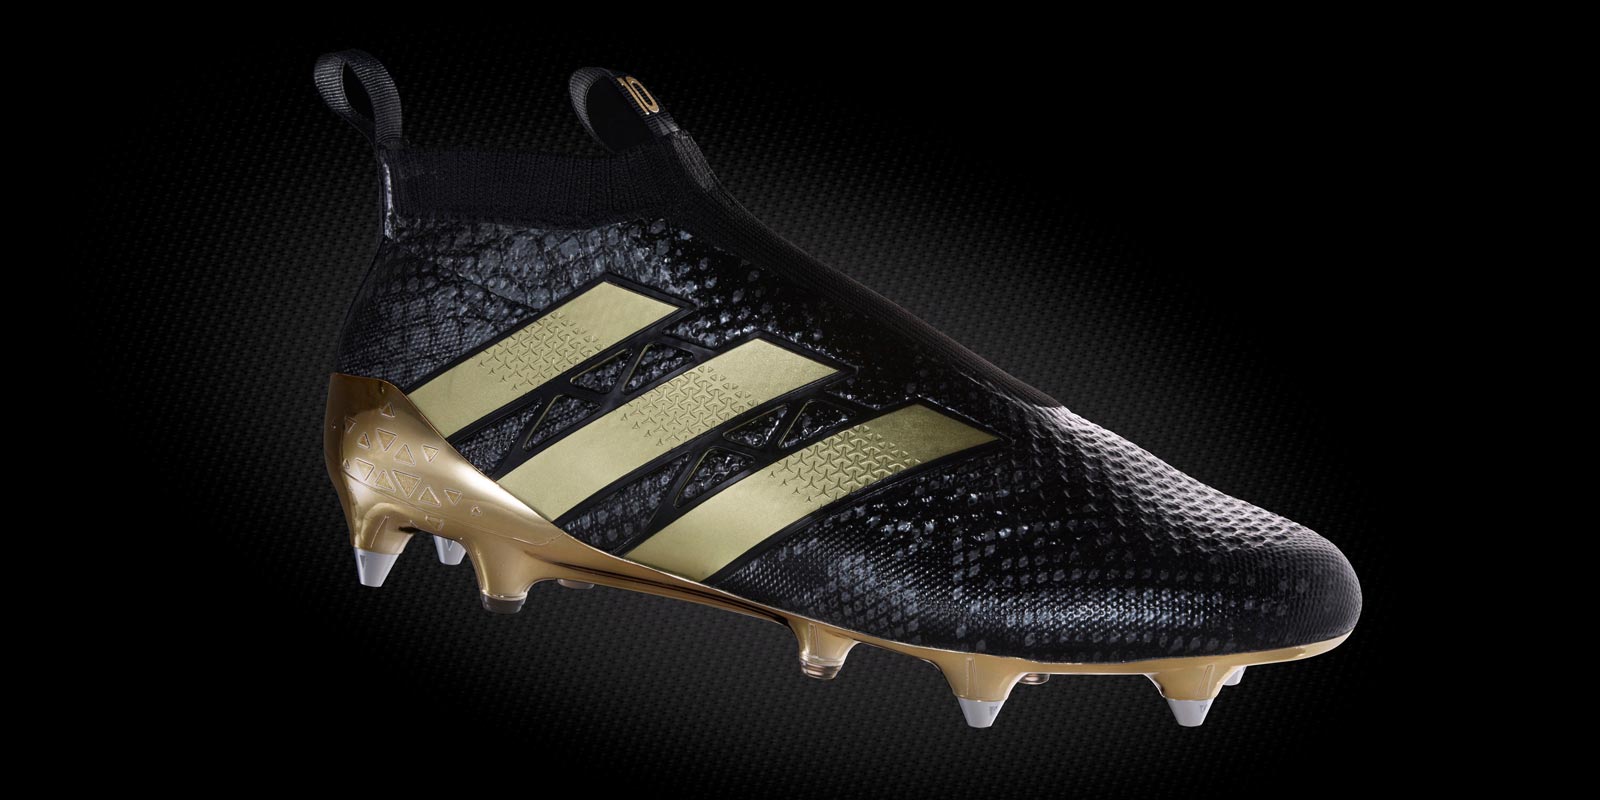 Black & Gold Adidas Ace PureControl Paul Boots Released - Footy Headlines